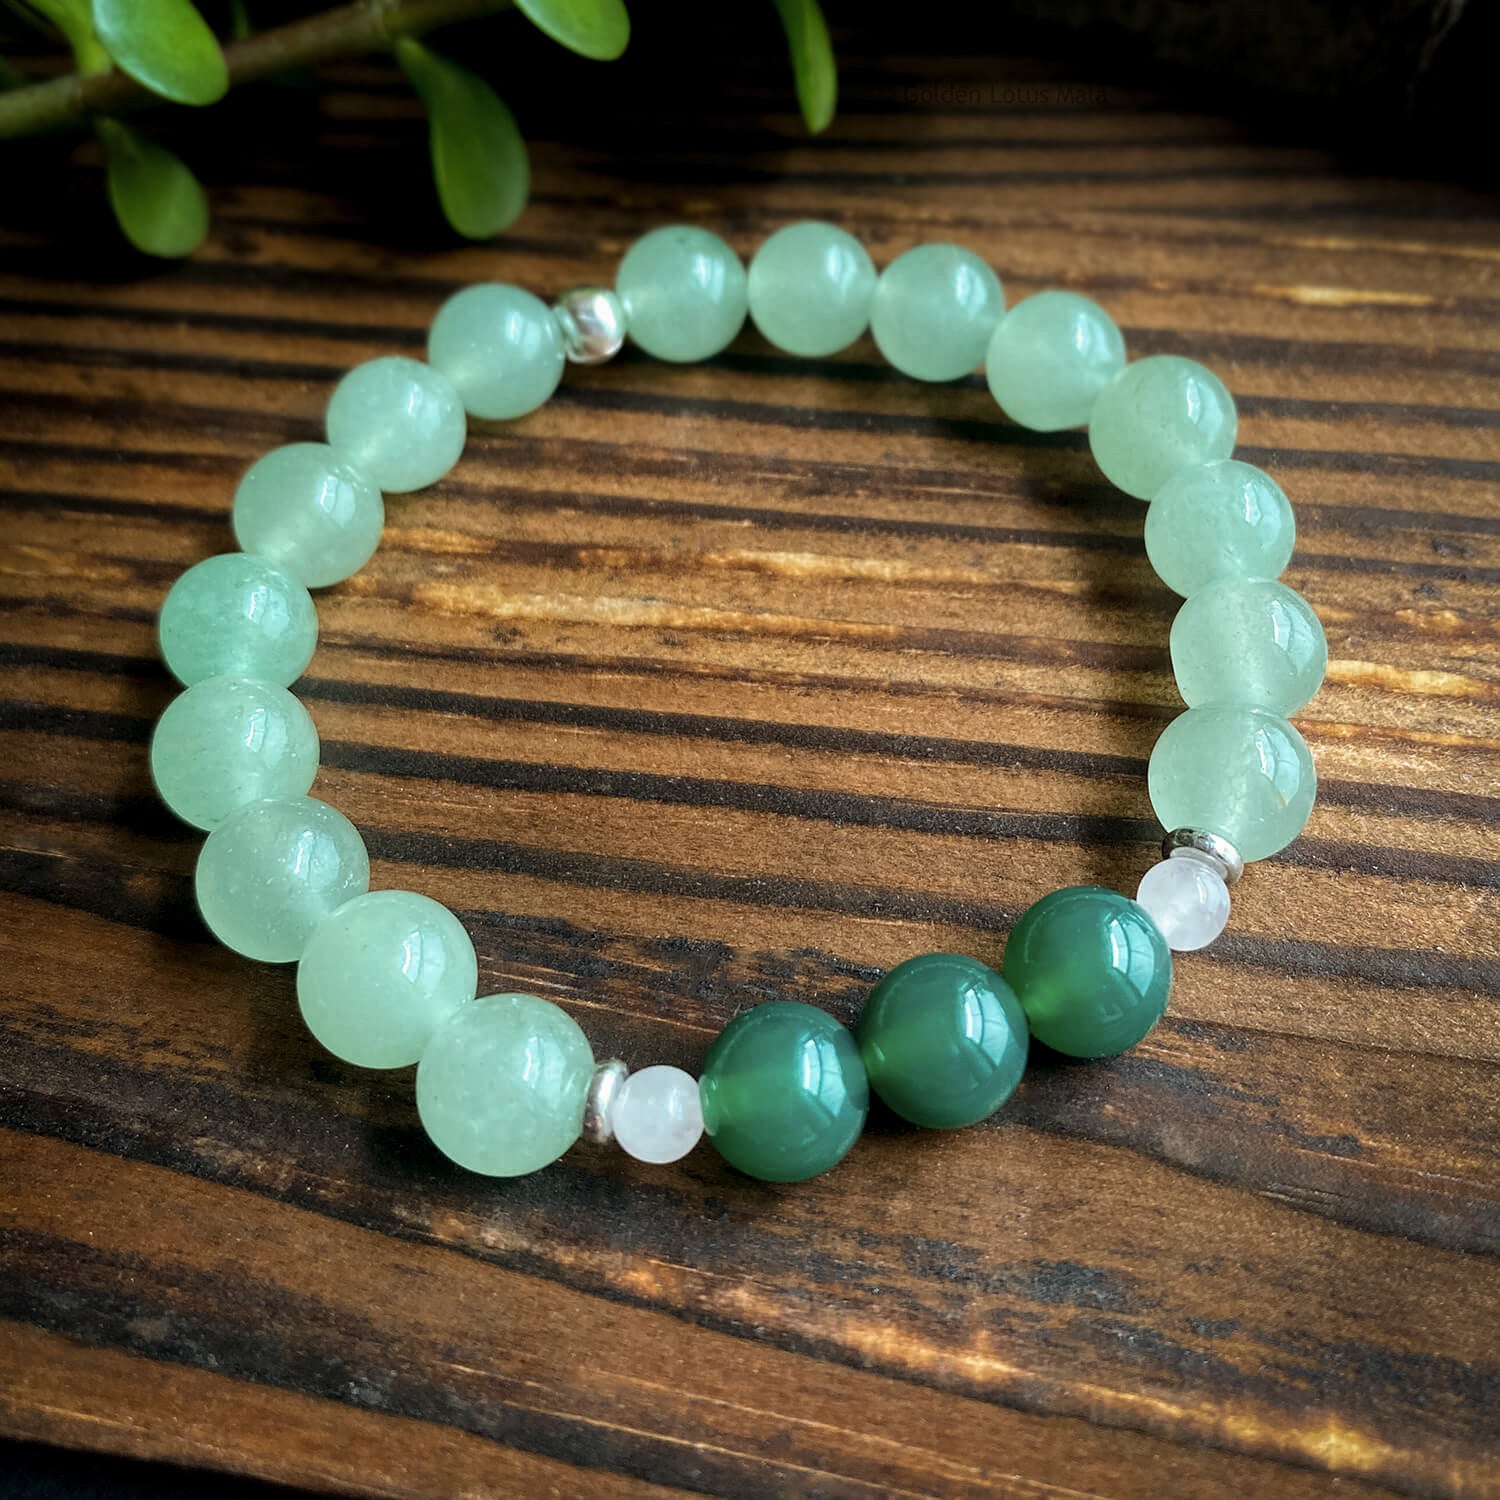 Jade Beads for Jewelry Making 6mm Natural Gemstone Beads for Making Jewelry Jade Bracelet Green Beads for Jewelry Making Chakra Crystal Jewerly